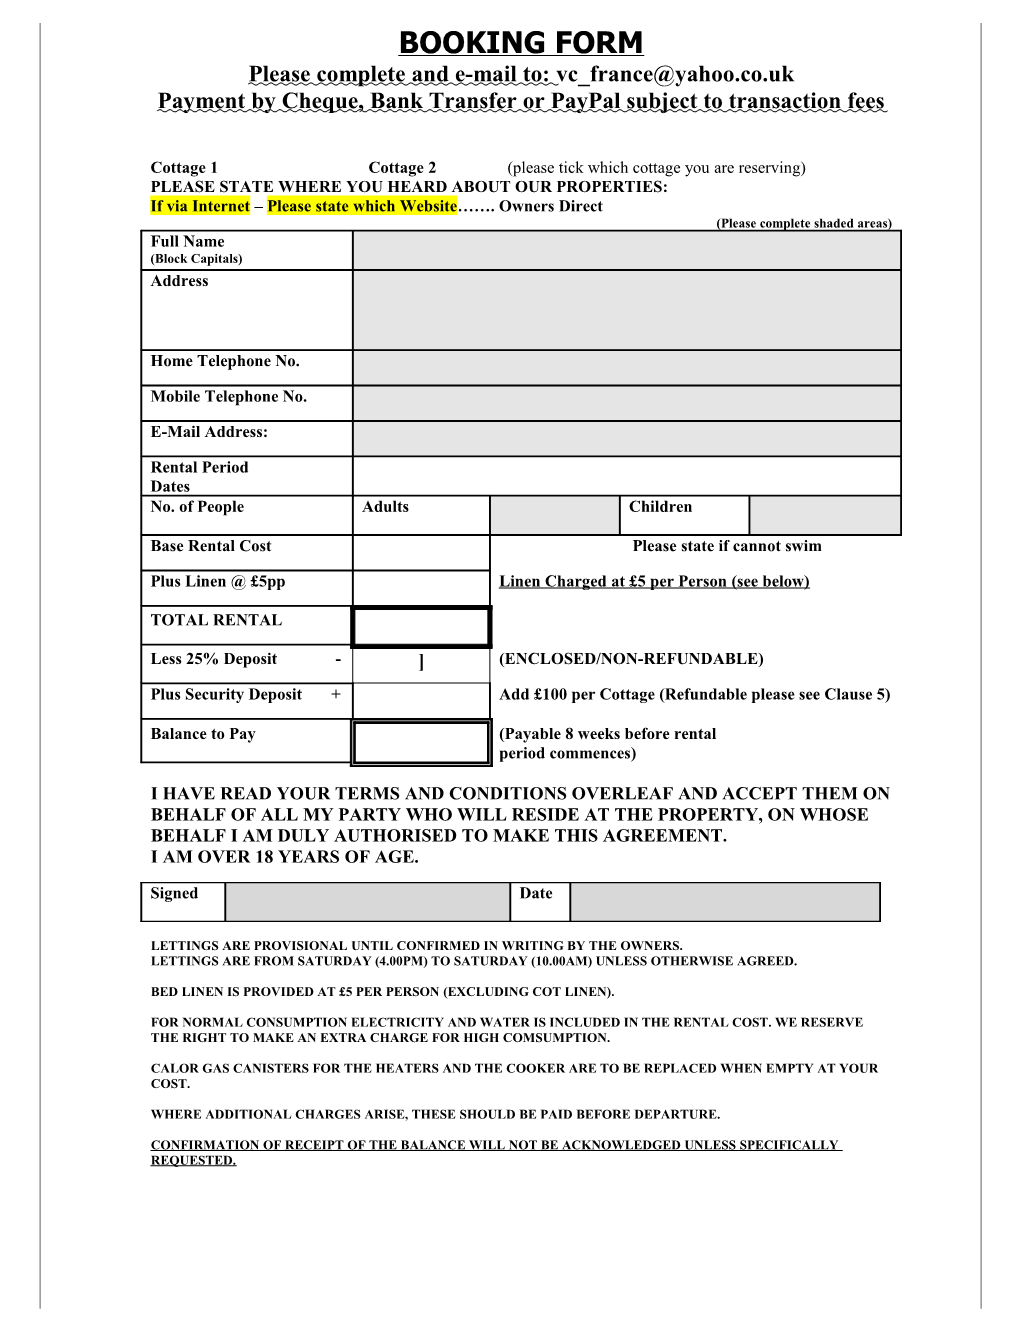 Booking Form - Cottage 1